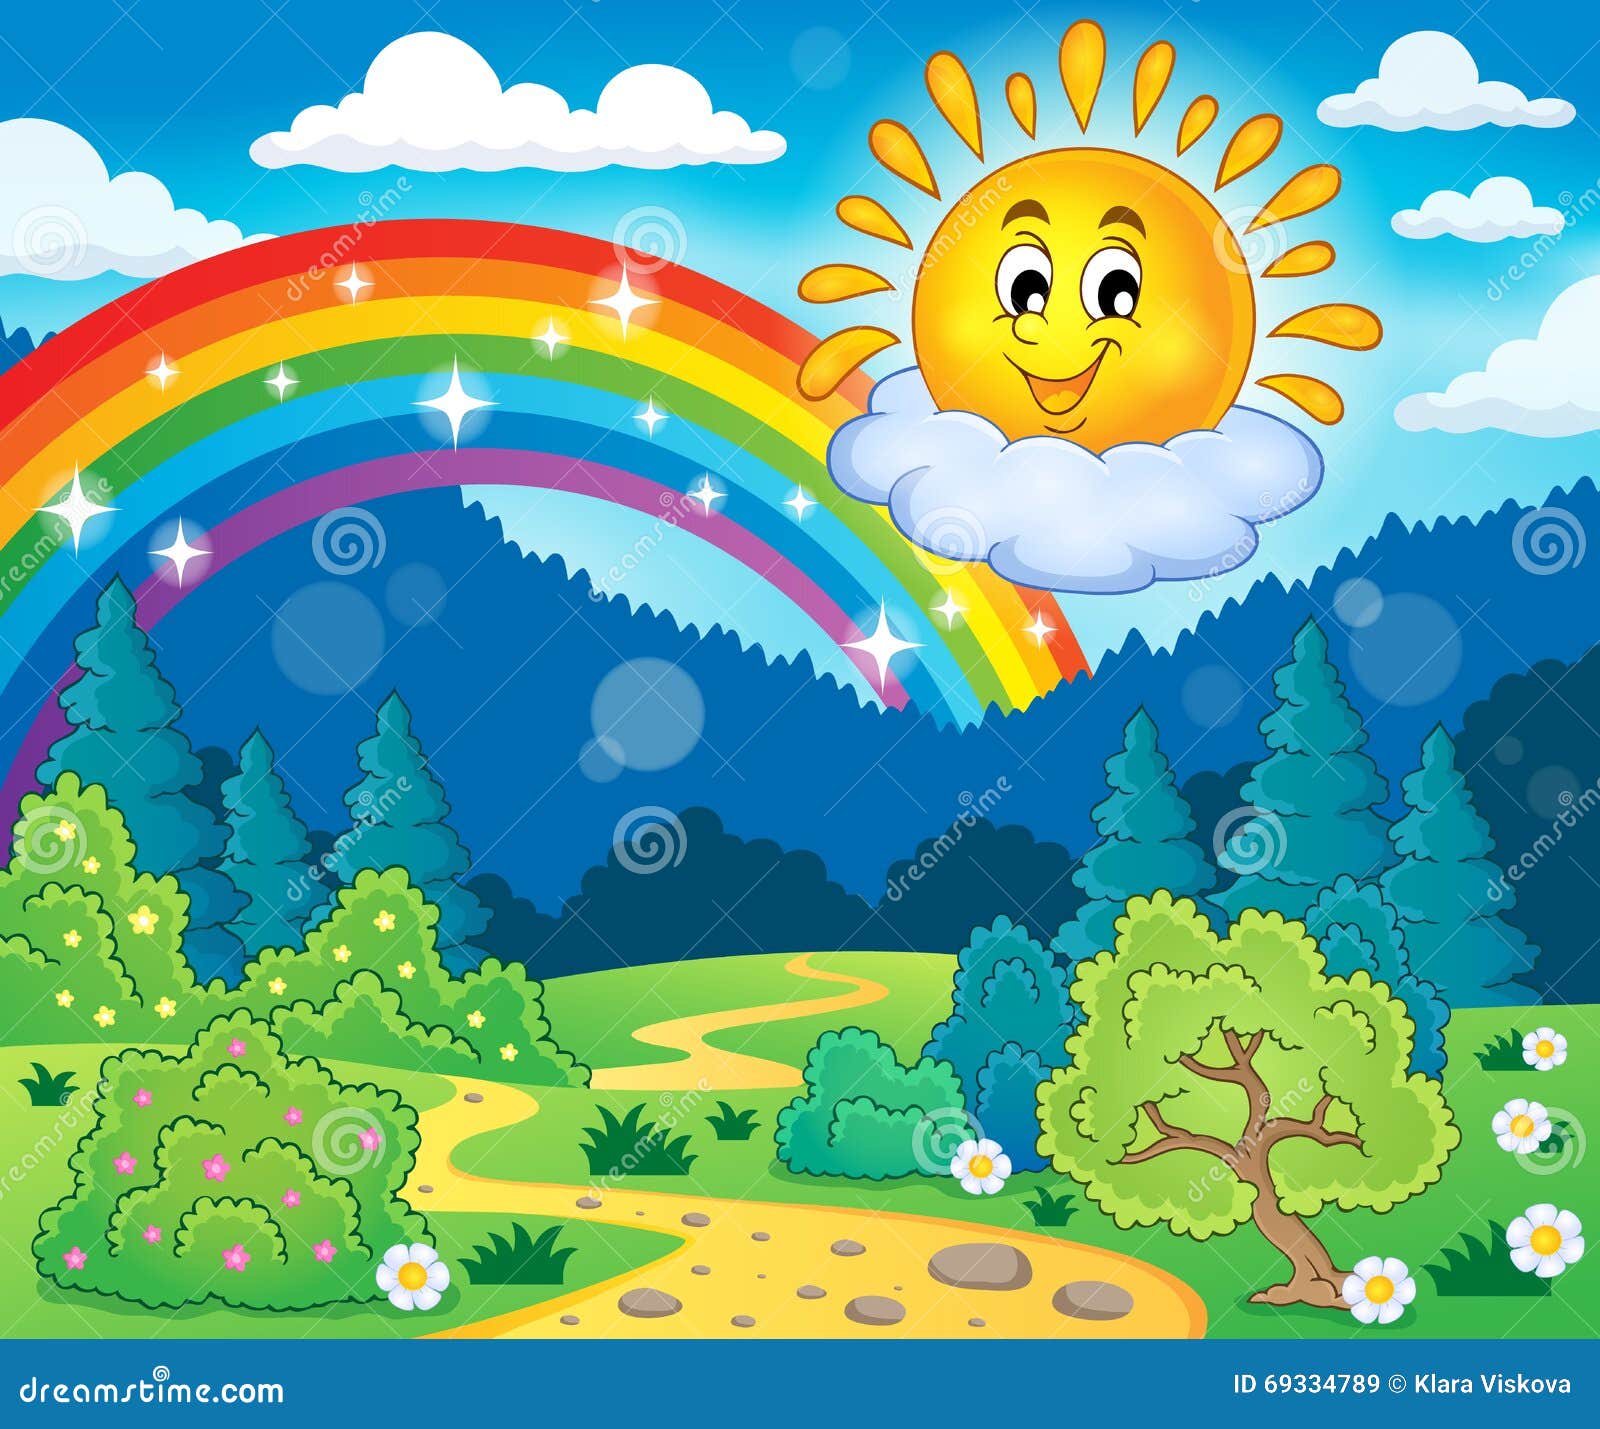 Spring Theme with Cheerful Sun Stock Vector - Illustration of smiling ...